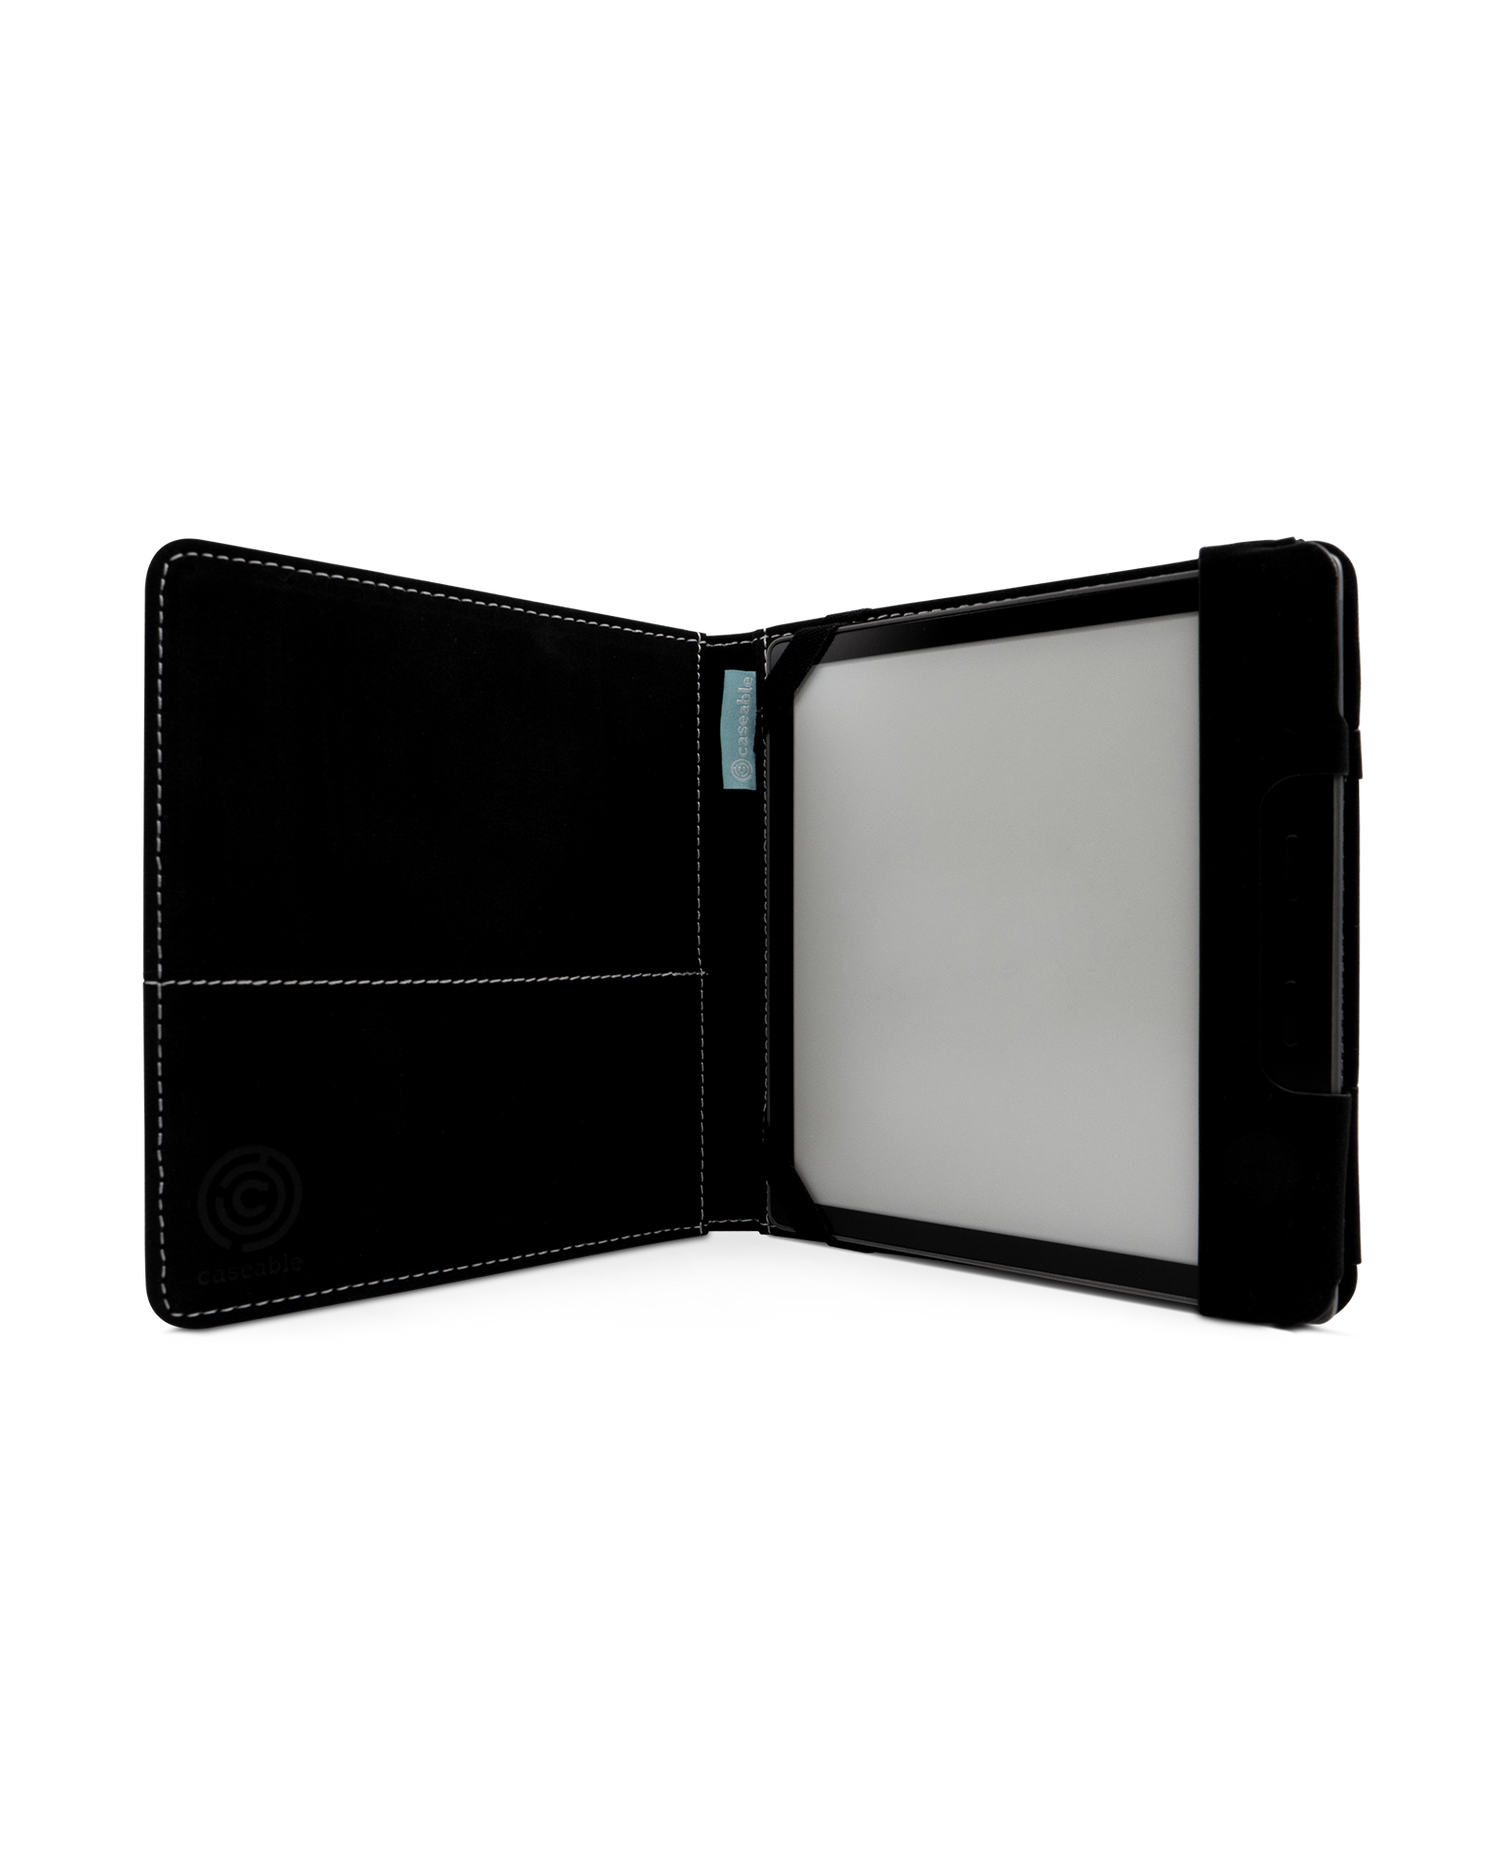 Lake eReader Case for tolino vision 6: Opened interior view